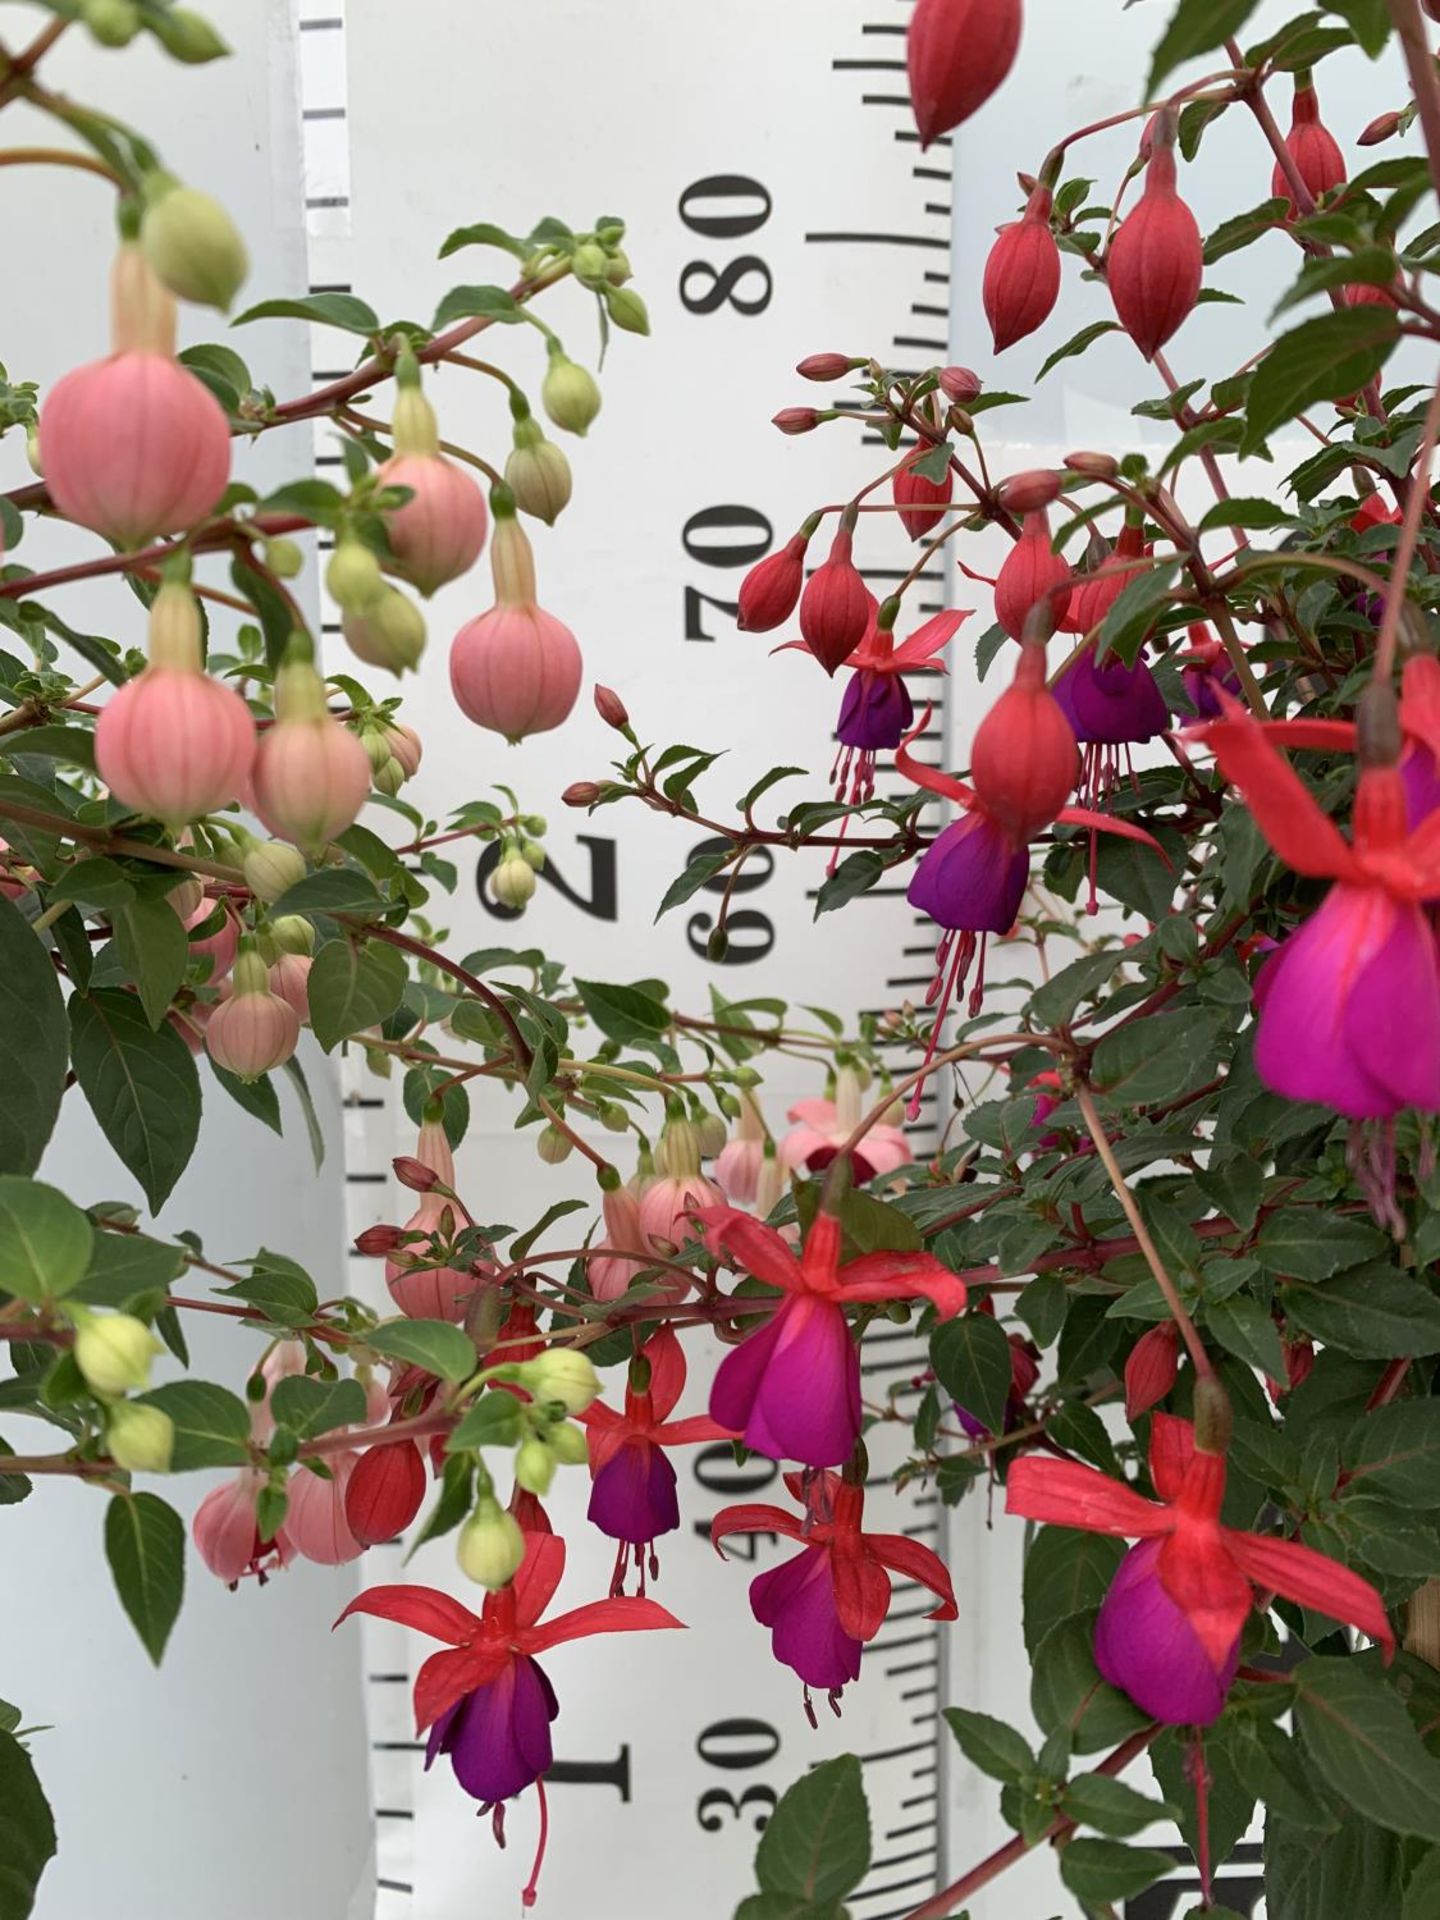 TWO BELLA STANDARD FUCHSIA IN A 3 LTR POTS 70CM -80CM TALL TO BE SOLD FOR THE TWO PLUS VAT - Image 5 of 8